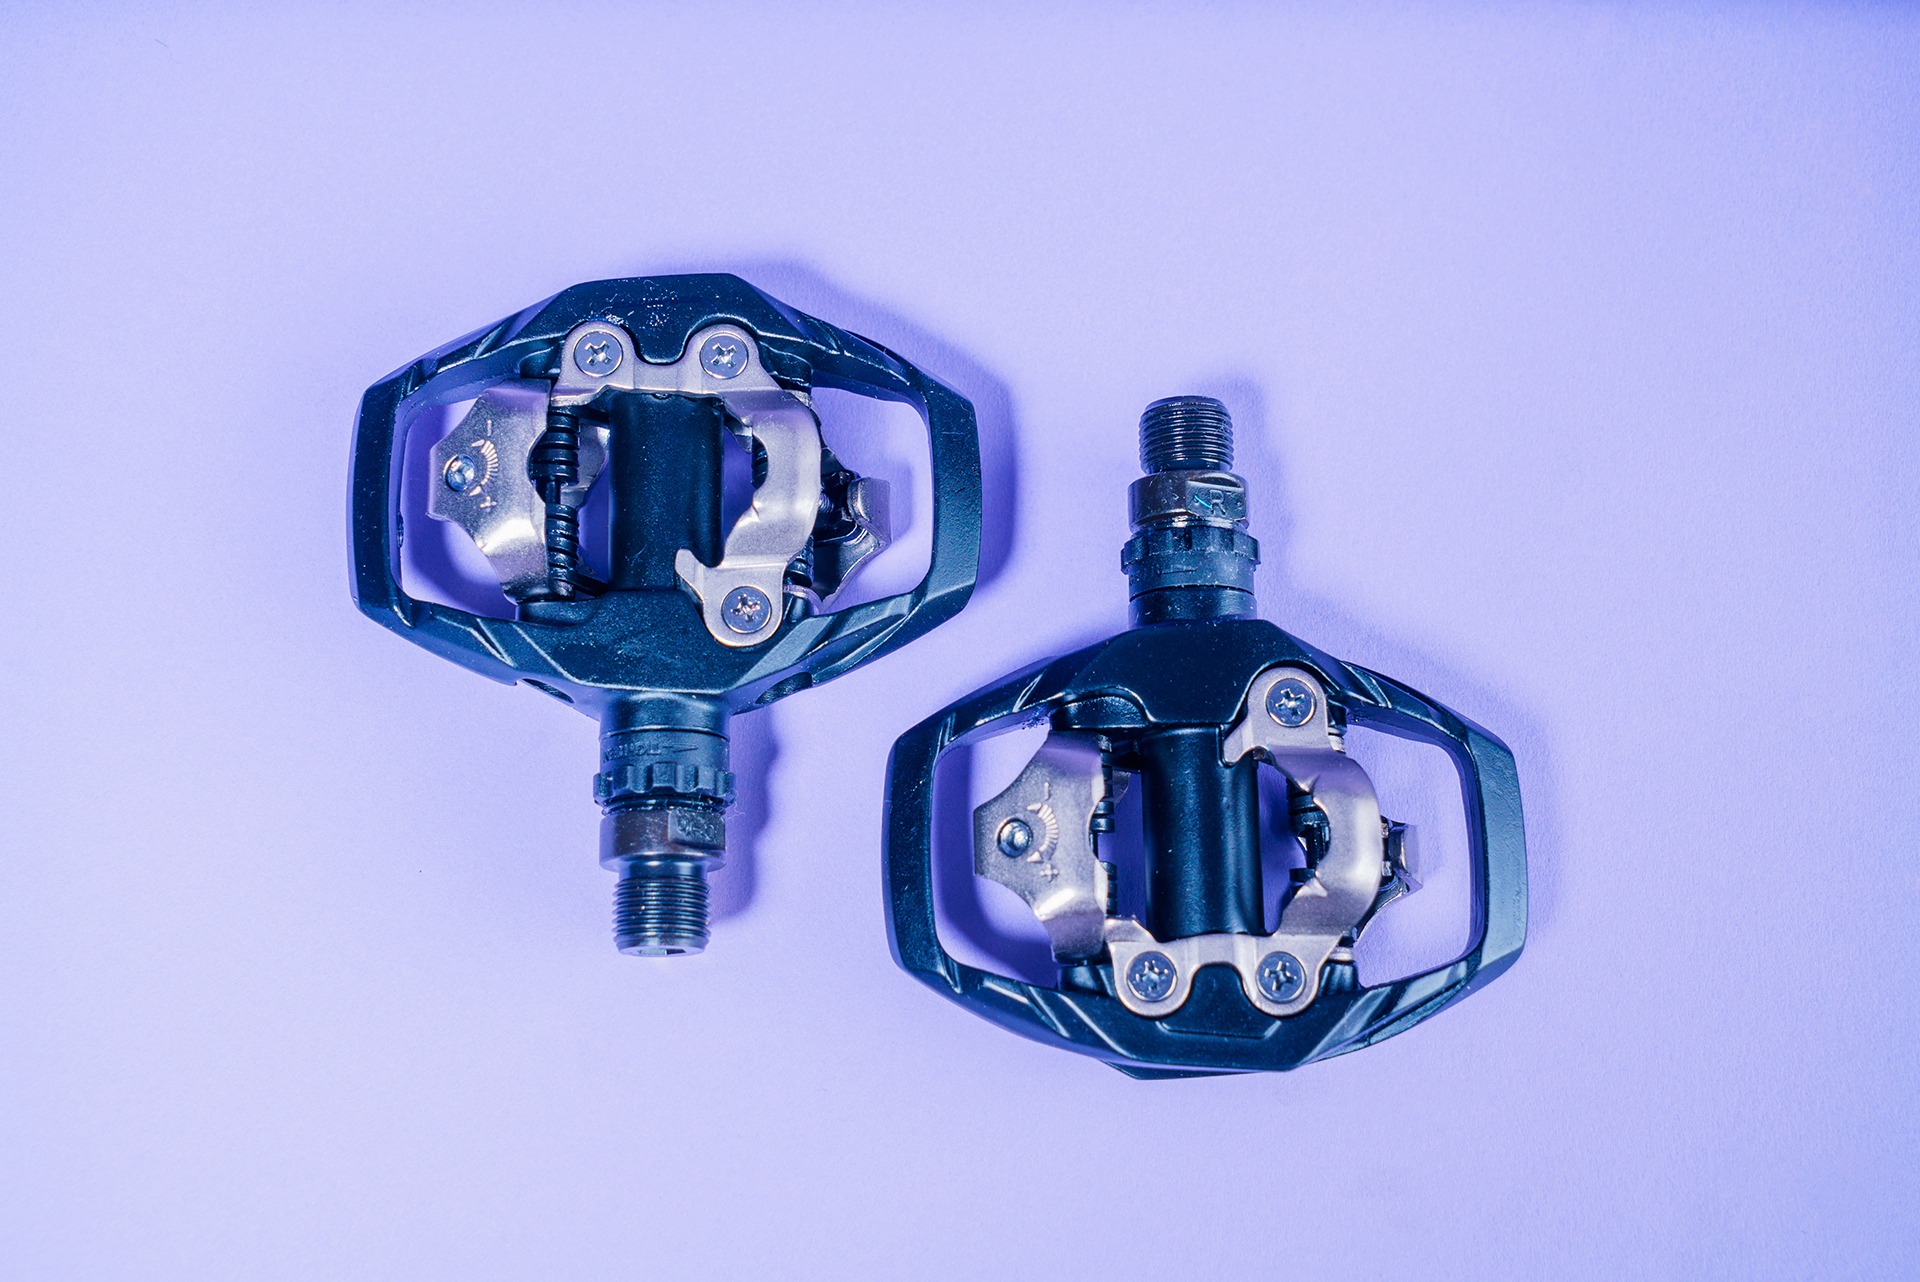 SHIMANO - M530 SPD PEDALS - REVIEW